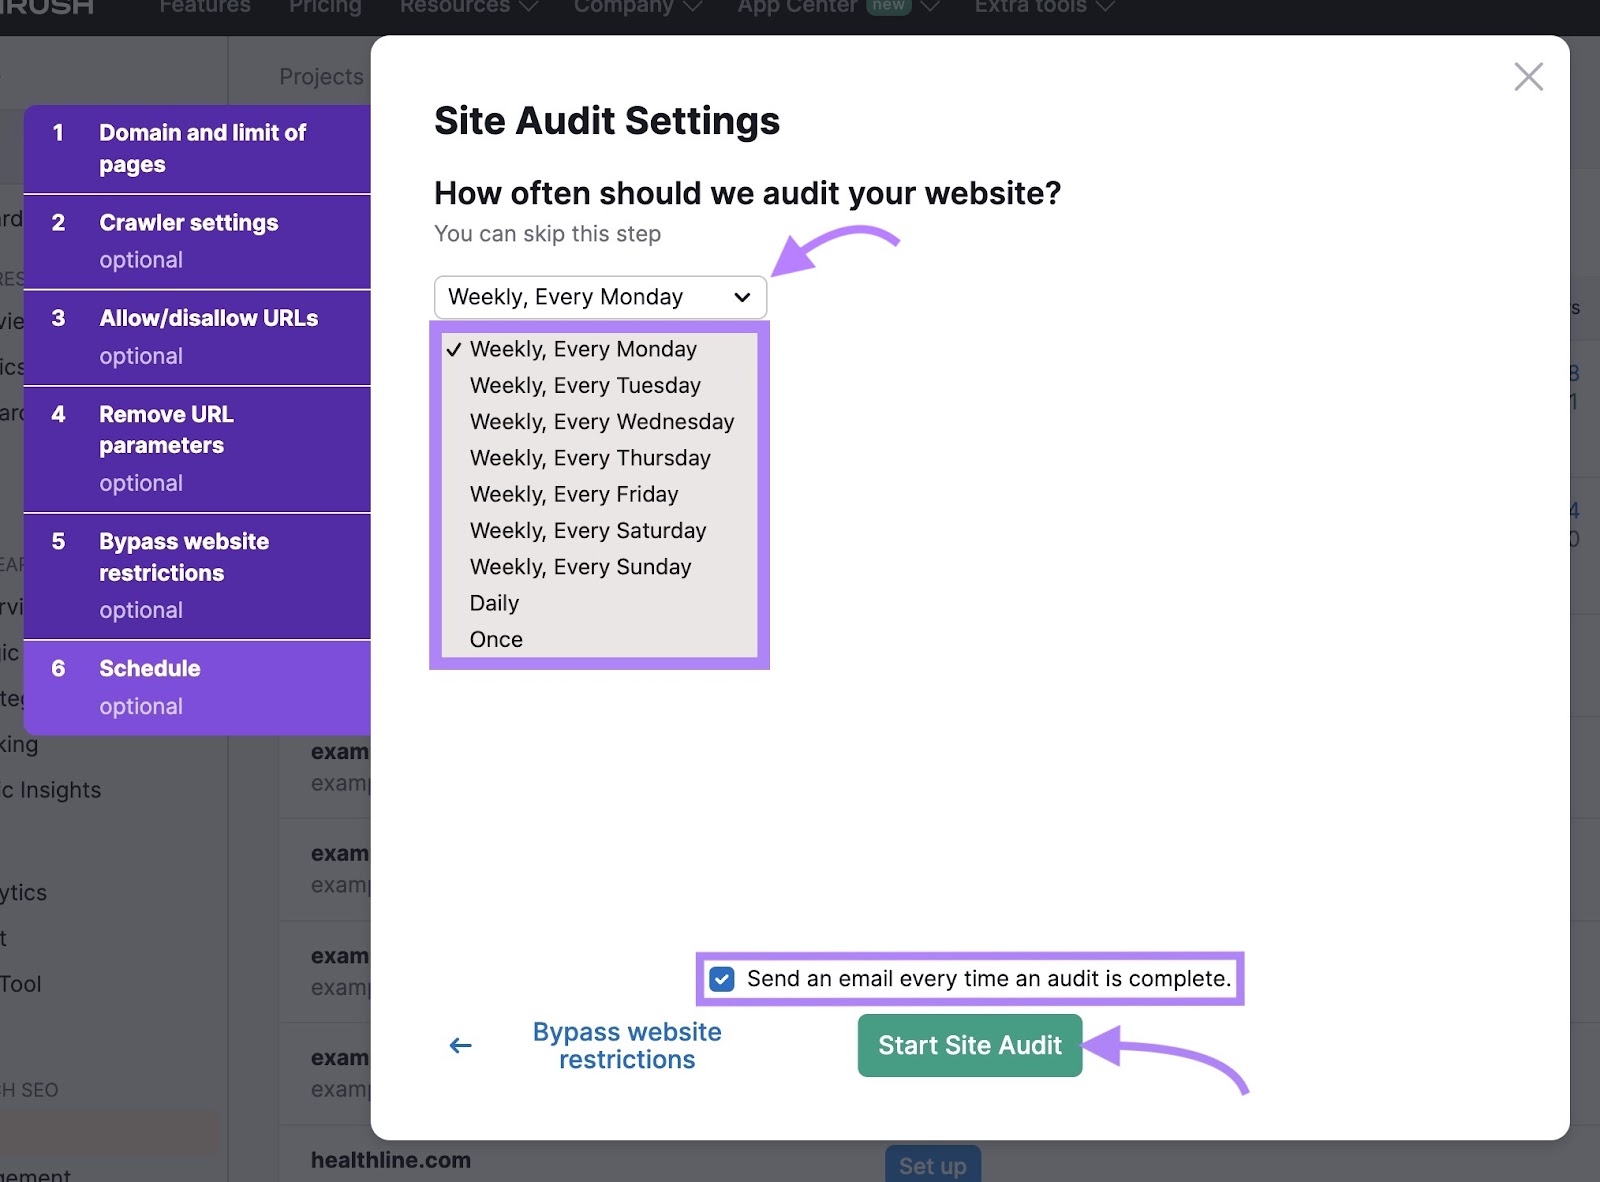 Scheduling settings page on Site Audit to set crawl frequency along with the "Start Site Audit" button highlighted.